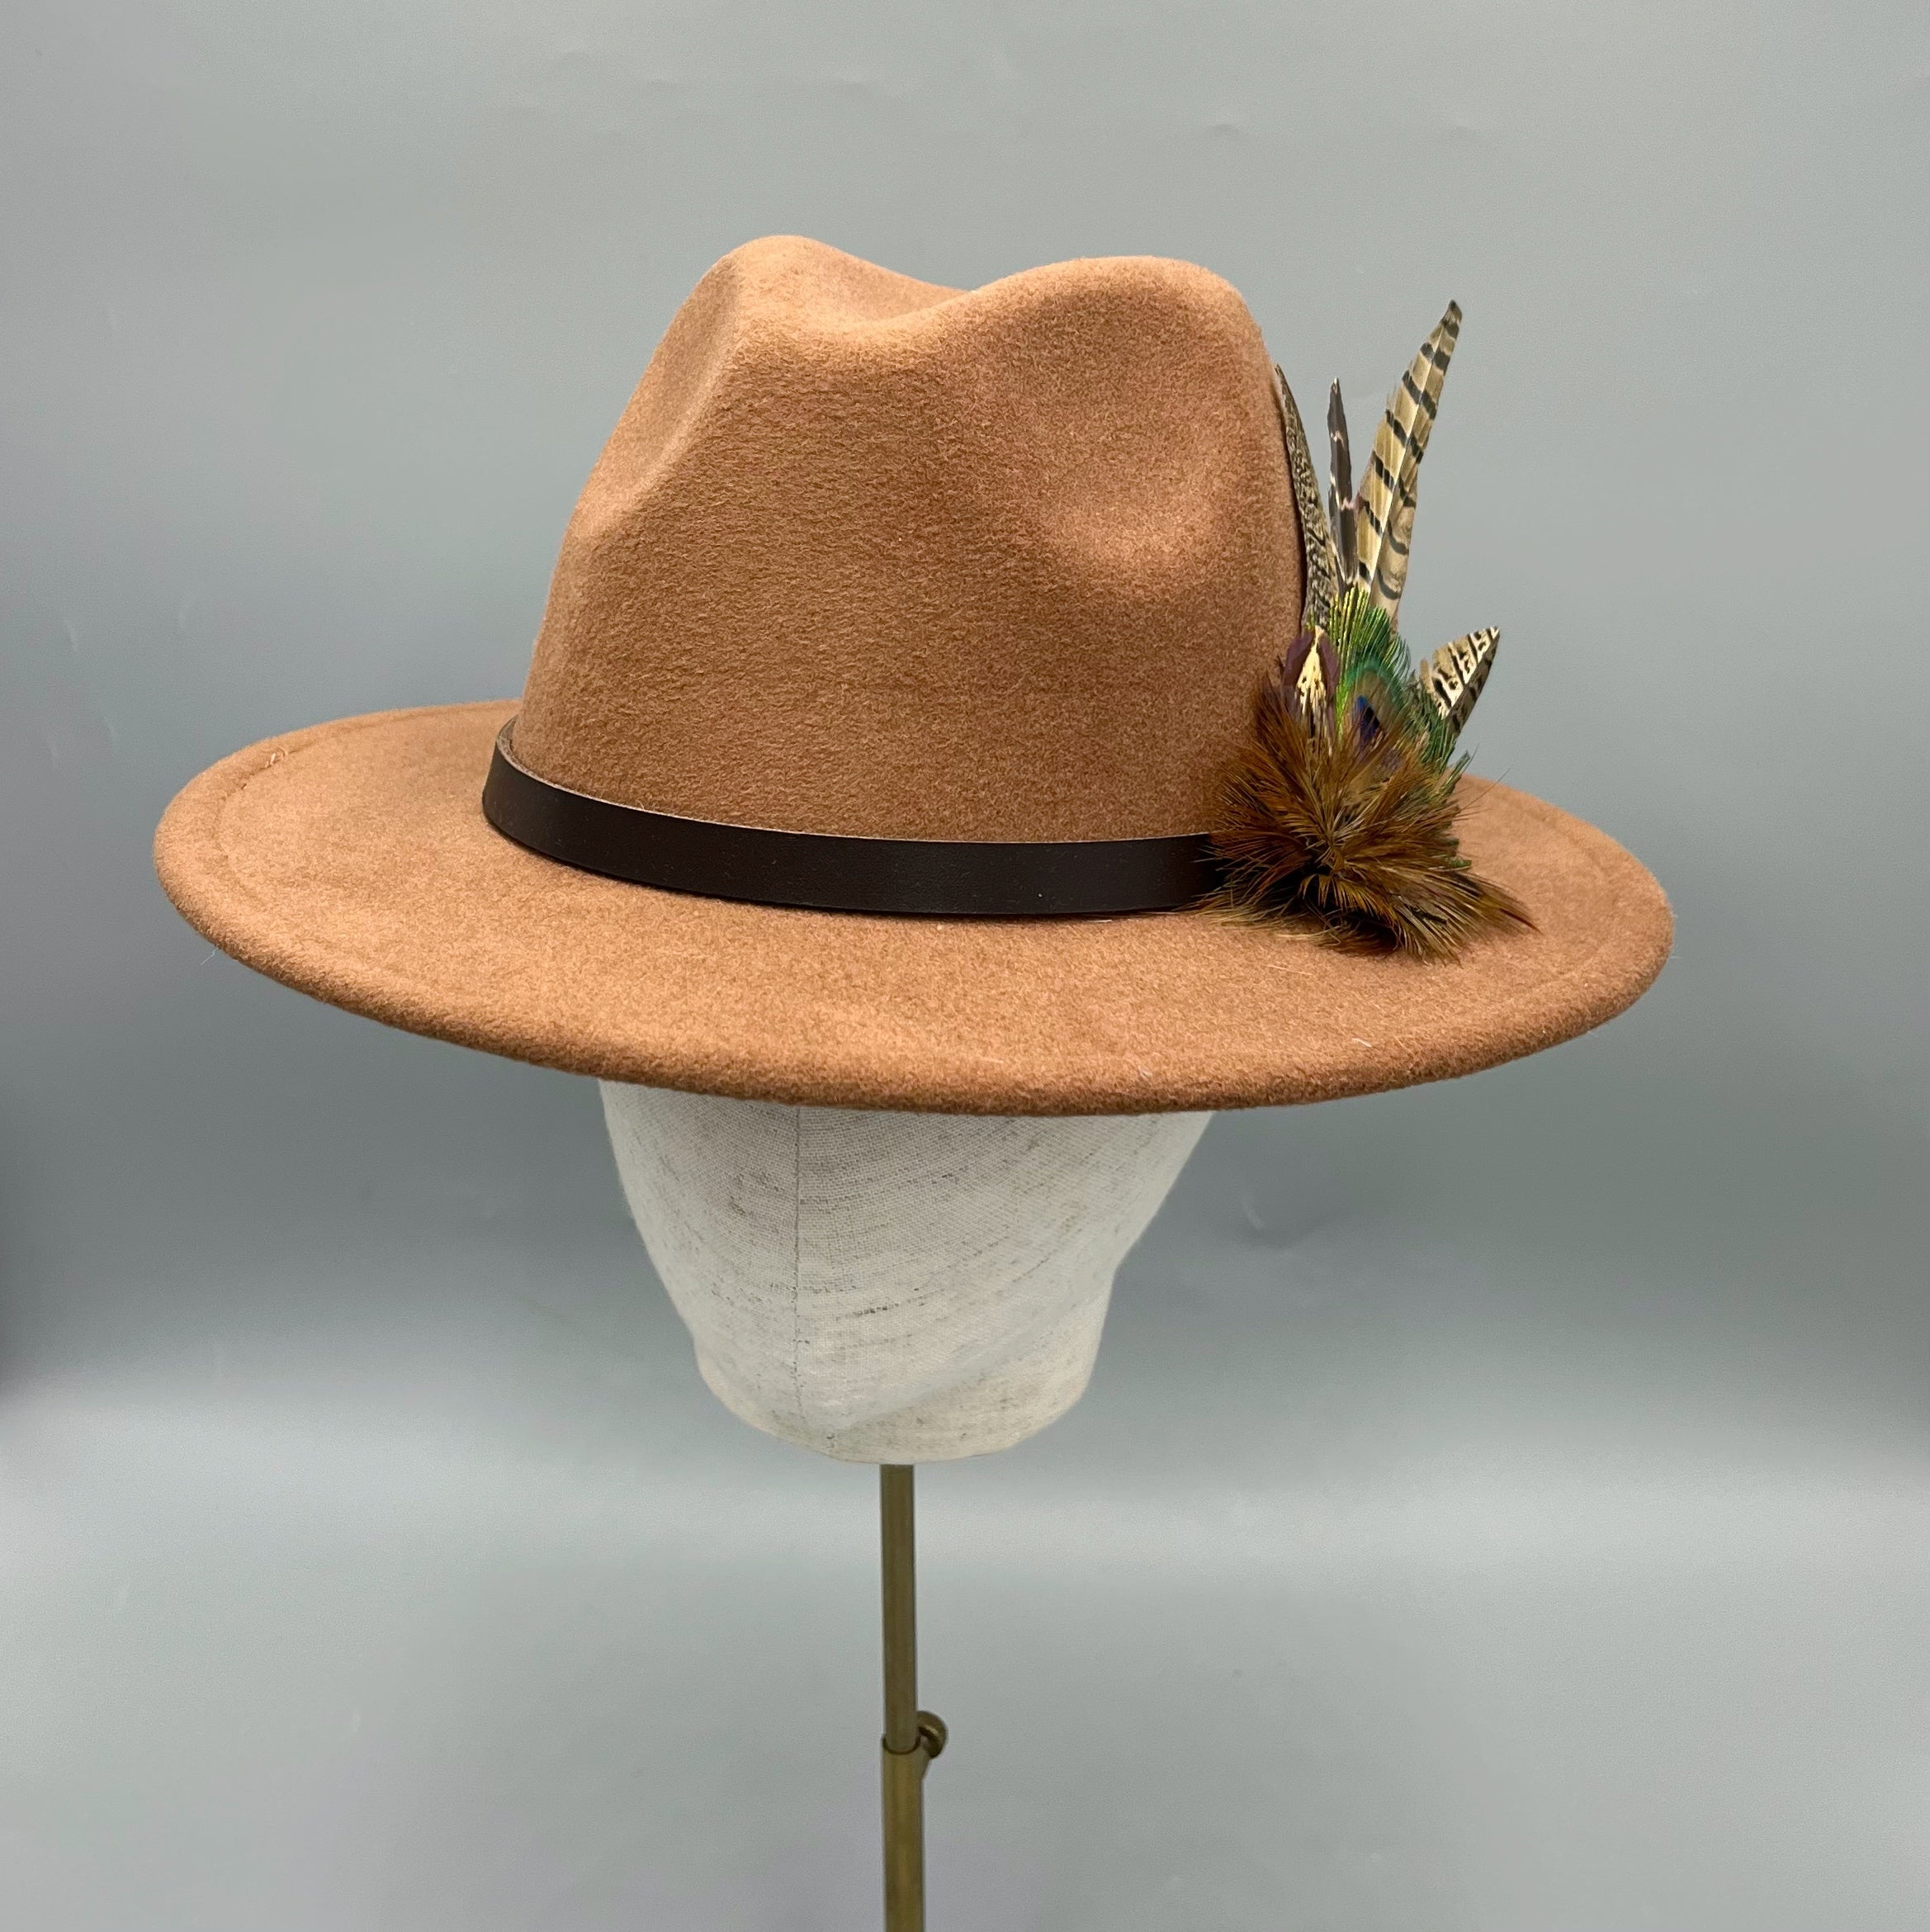 Tan fedora hand embellished with natural game bird feathers